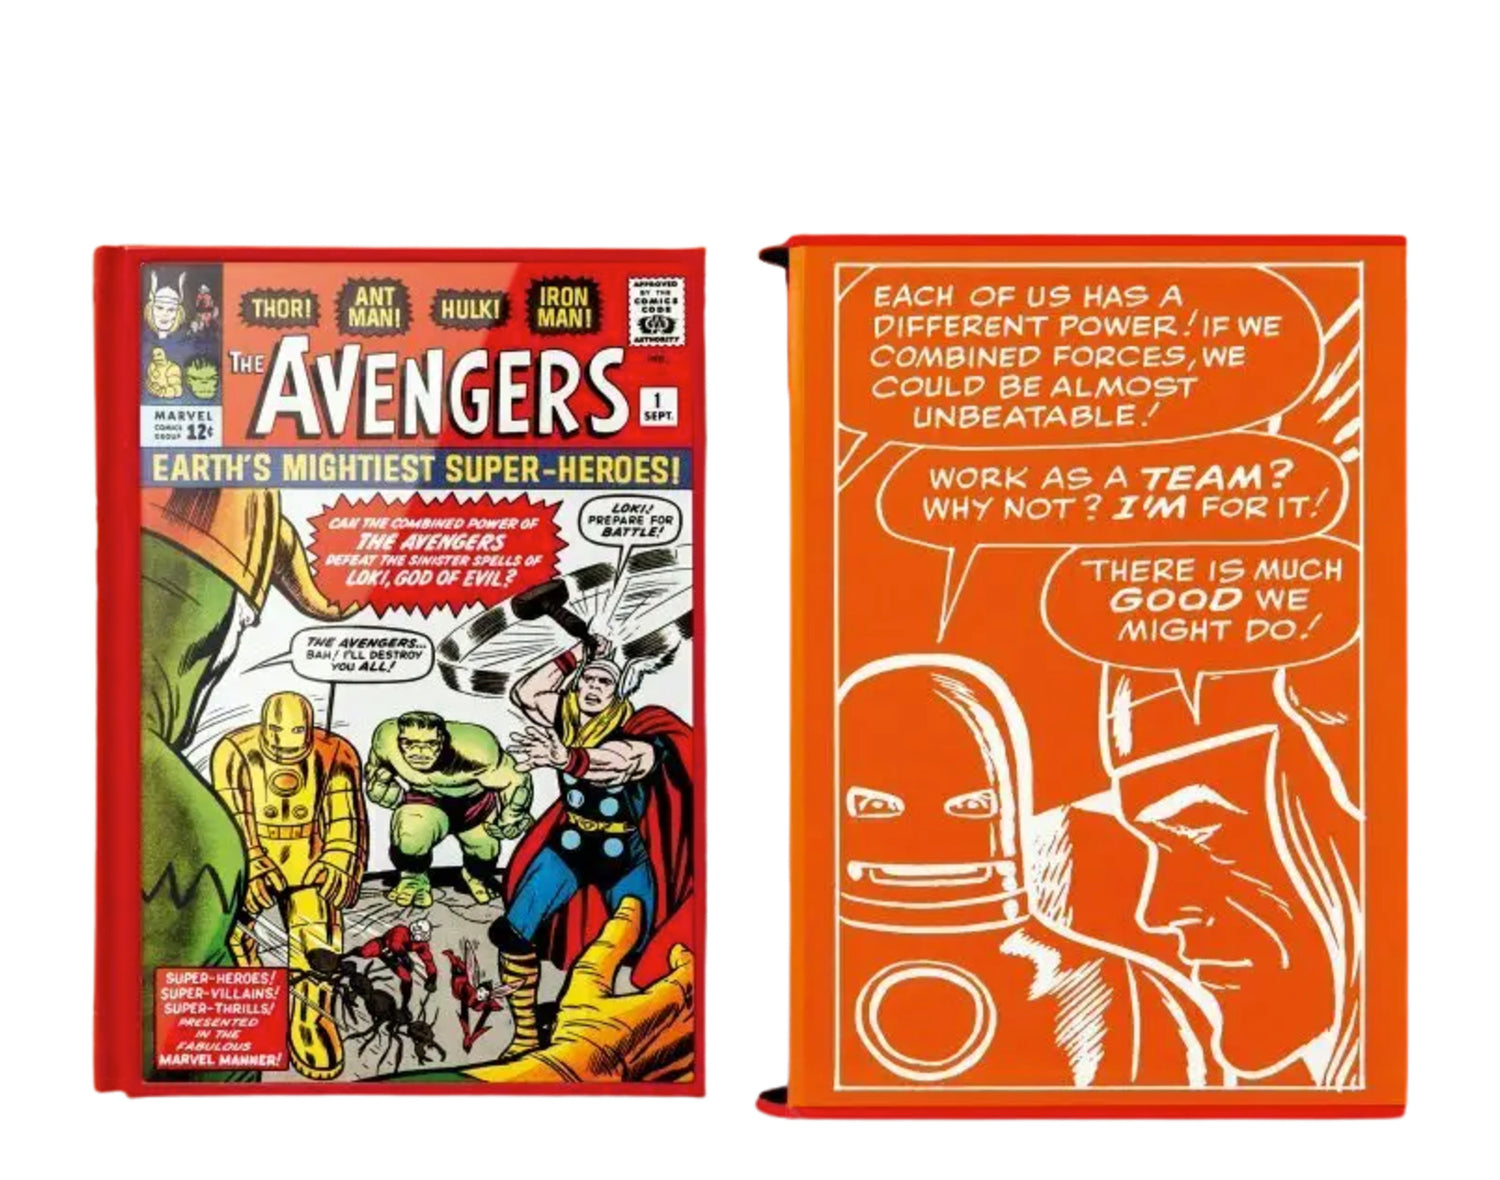 Taschen Books - Marvel Comics Library. Avengers. Vol. 1. 1963–1965 - Collector’s Edition of 1,000 numbered copies